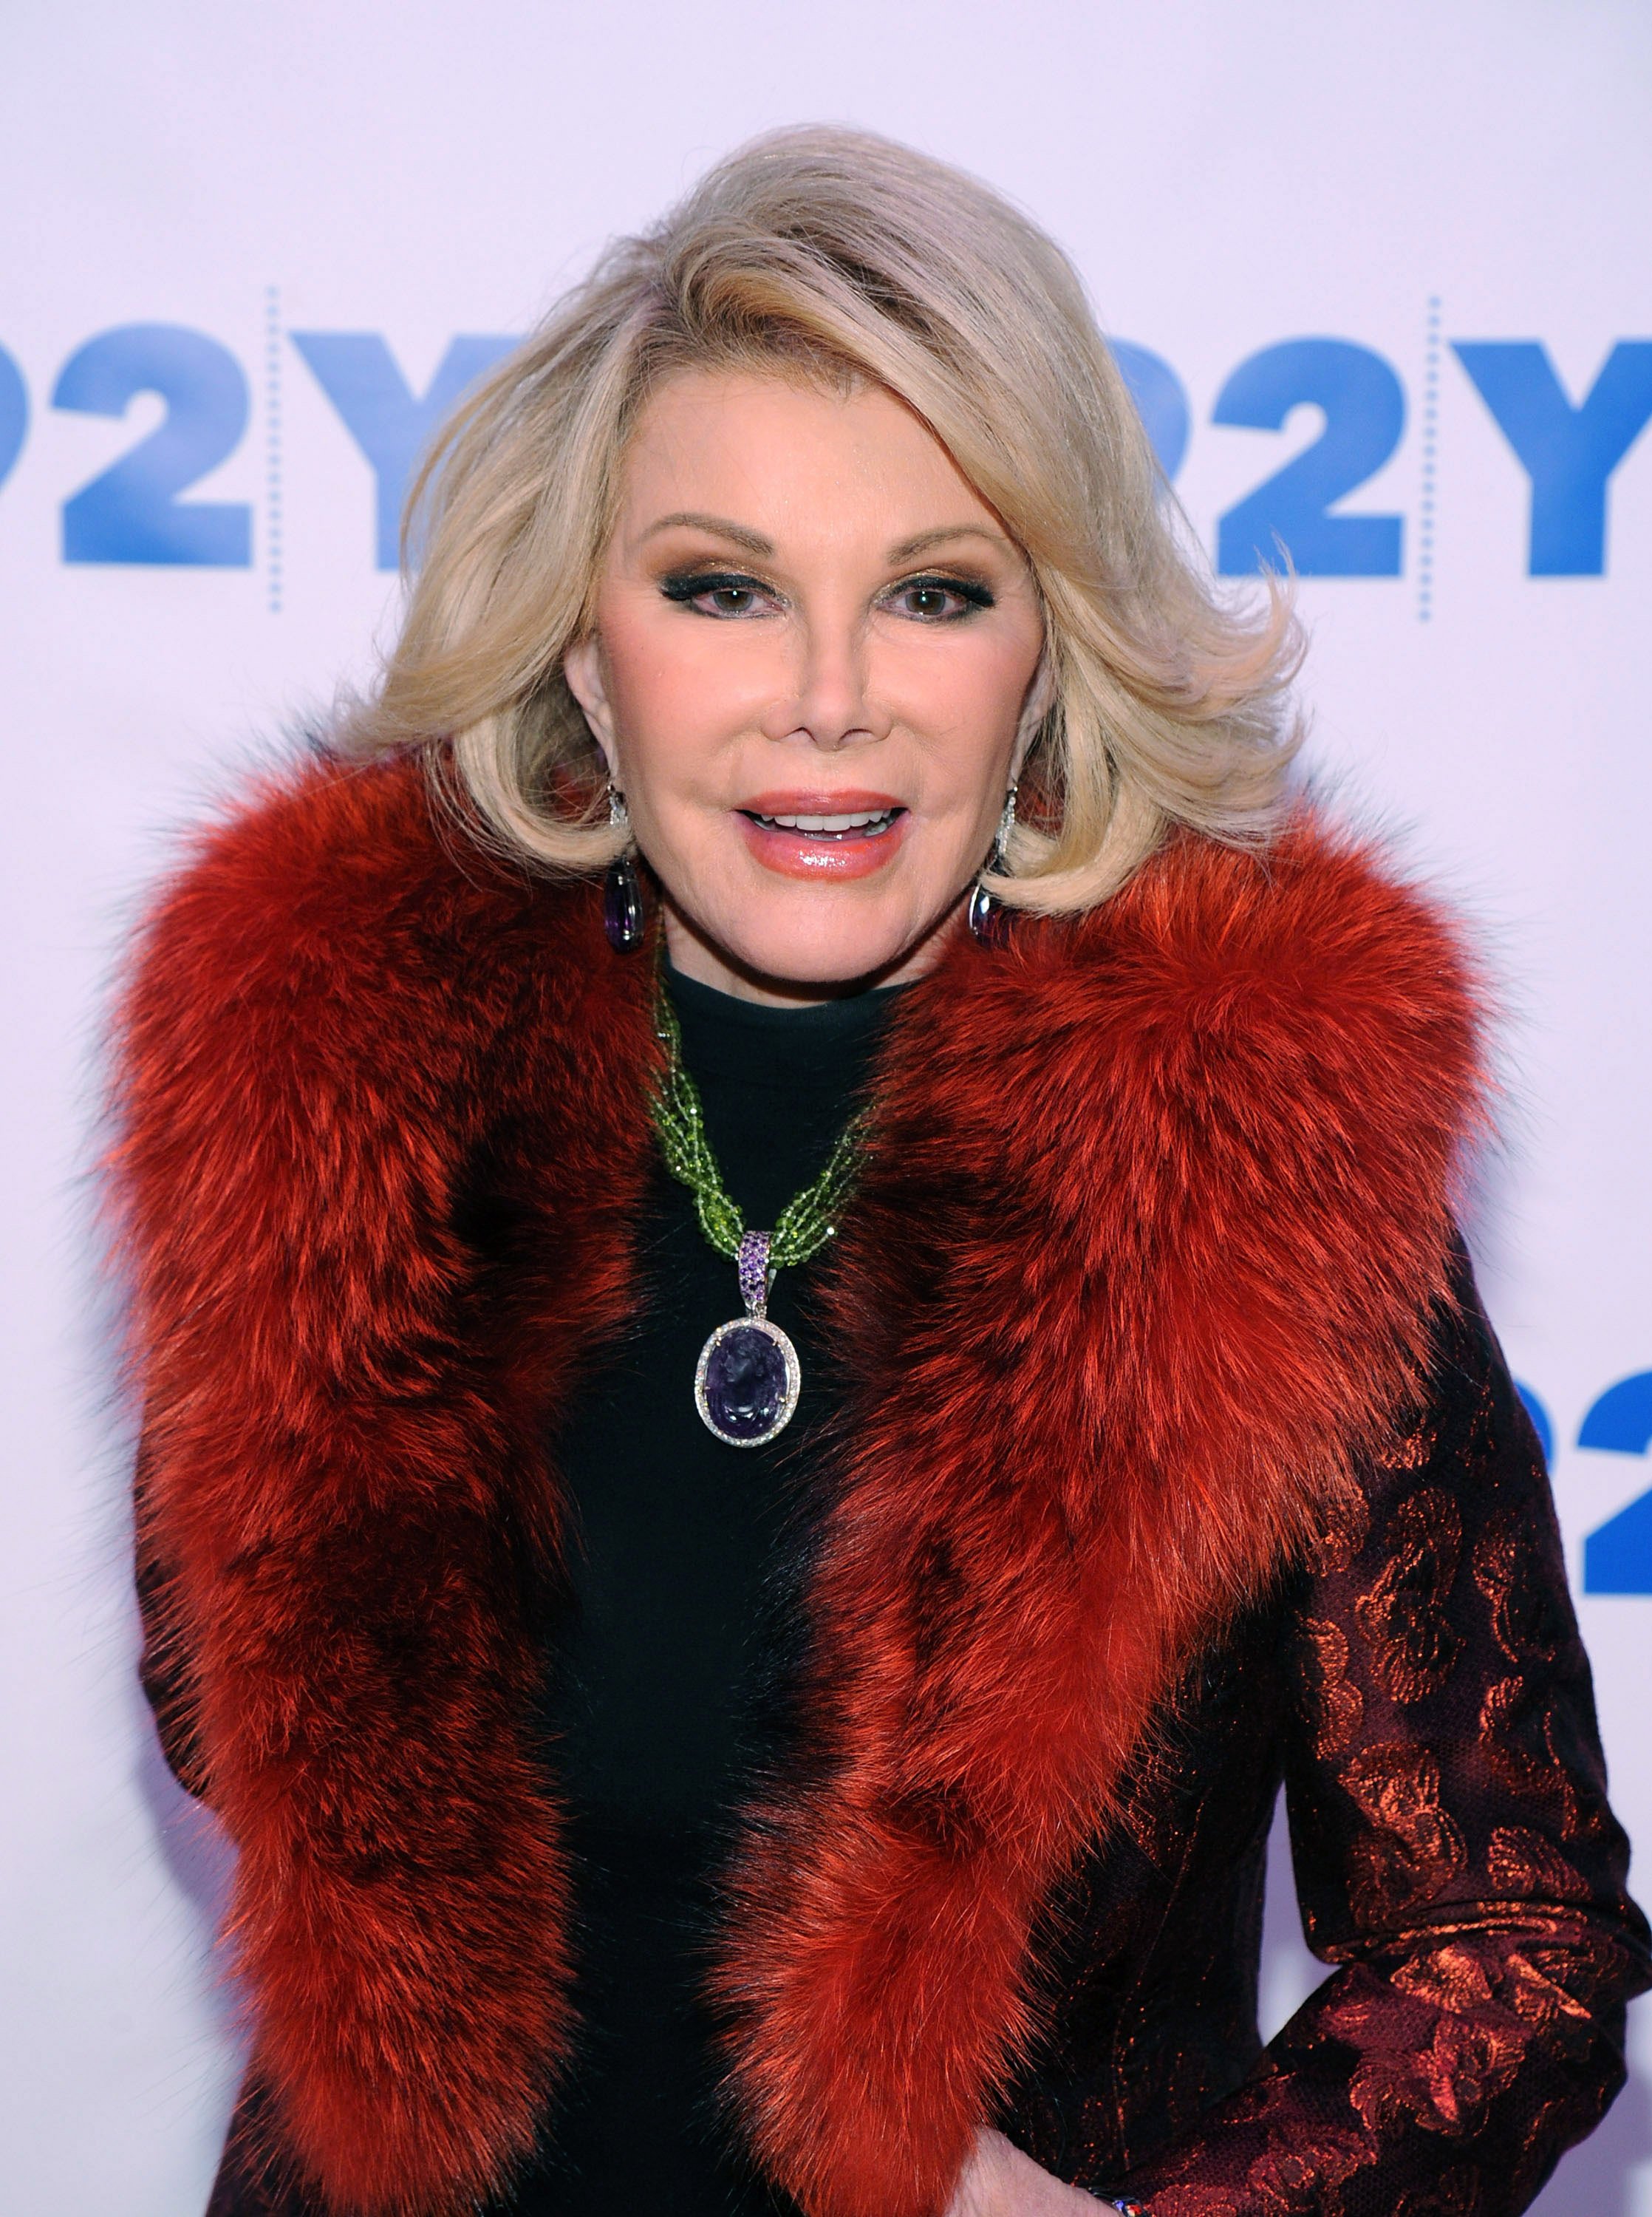 Joan Rivers attends An Evening With Joan And Melissa Rivers at 92nd Street Y on January 22, 2014, in New York City. | Source: Getty Images